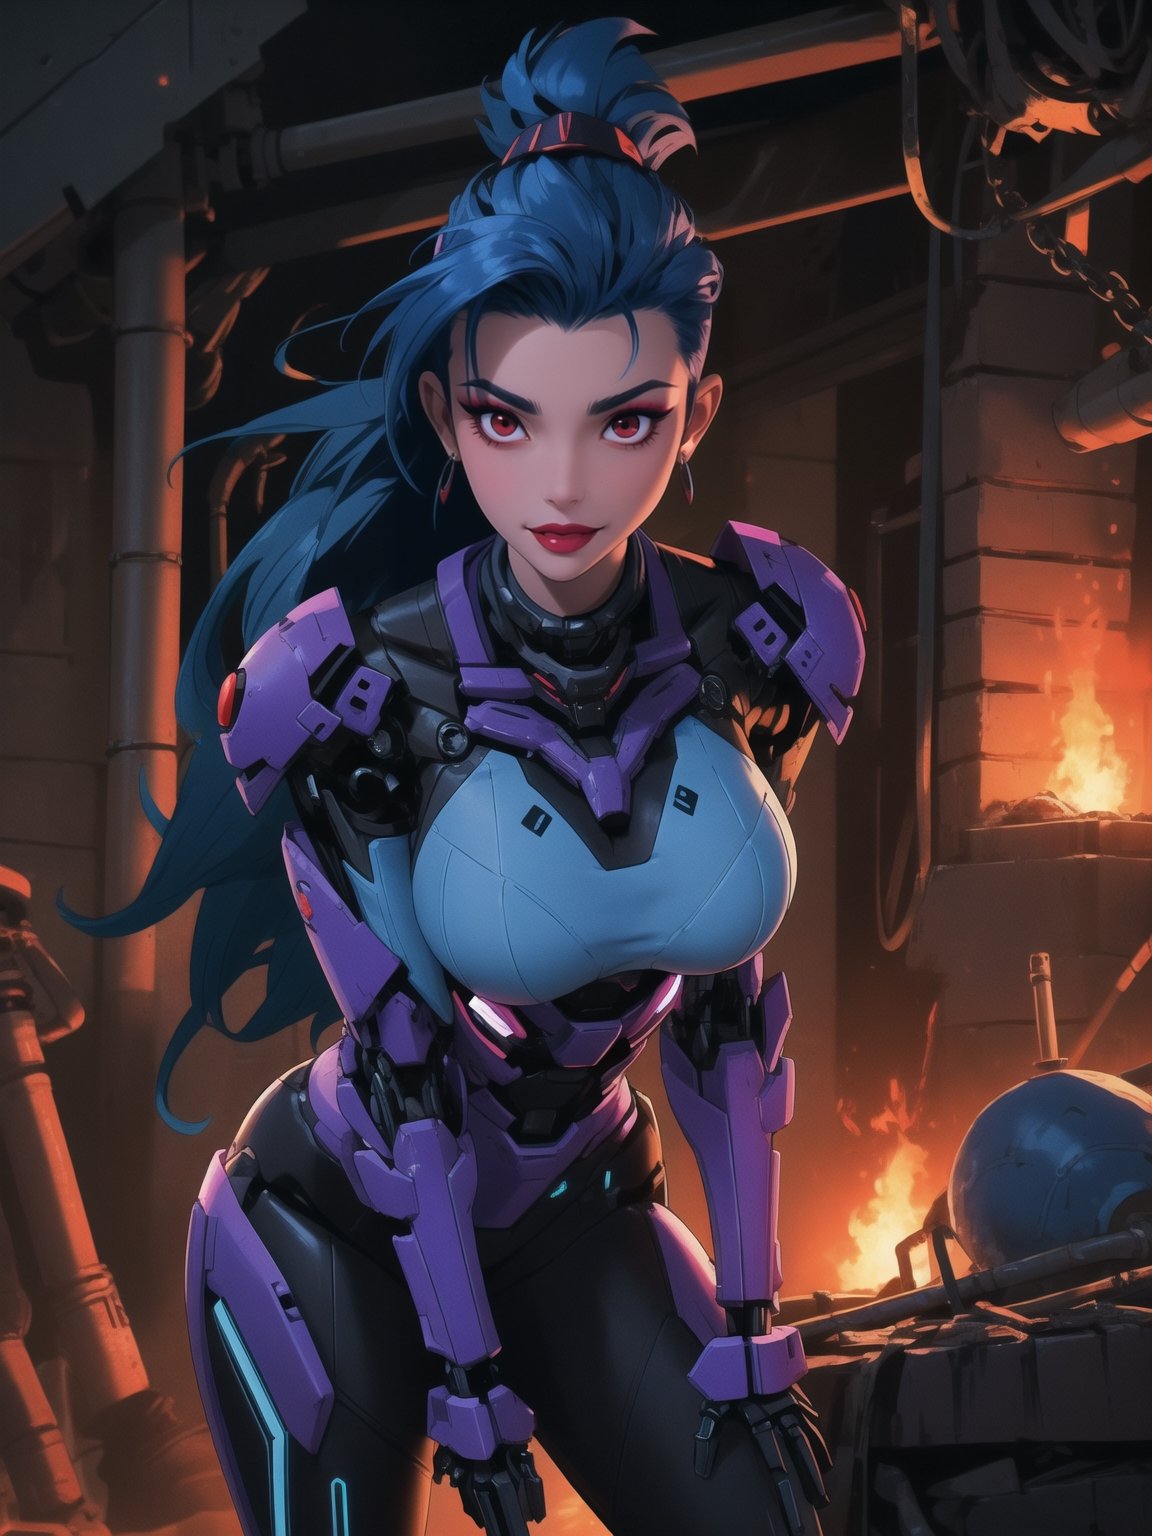 A blue-haired, mohawk-styled woman, with voluptuous curves and a high-tech mech suit, strikes a sultry pose amidst a dark, mechanical dungeon setting, leaning against one of the structures